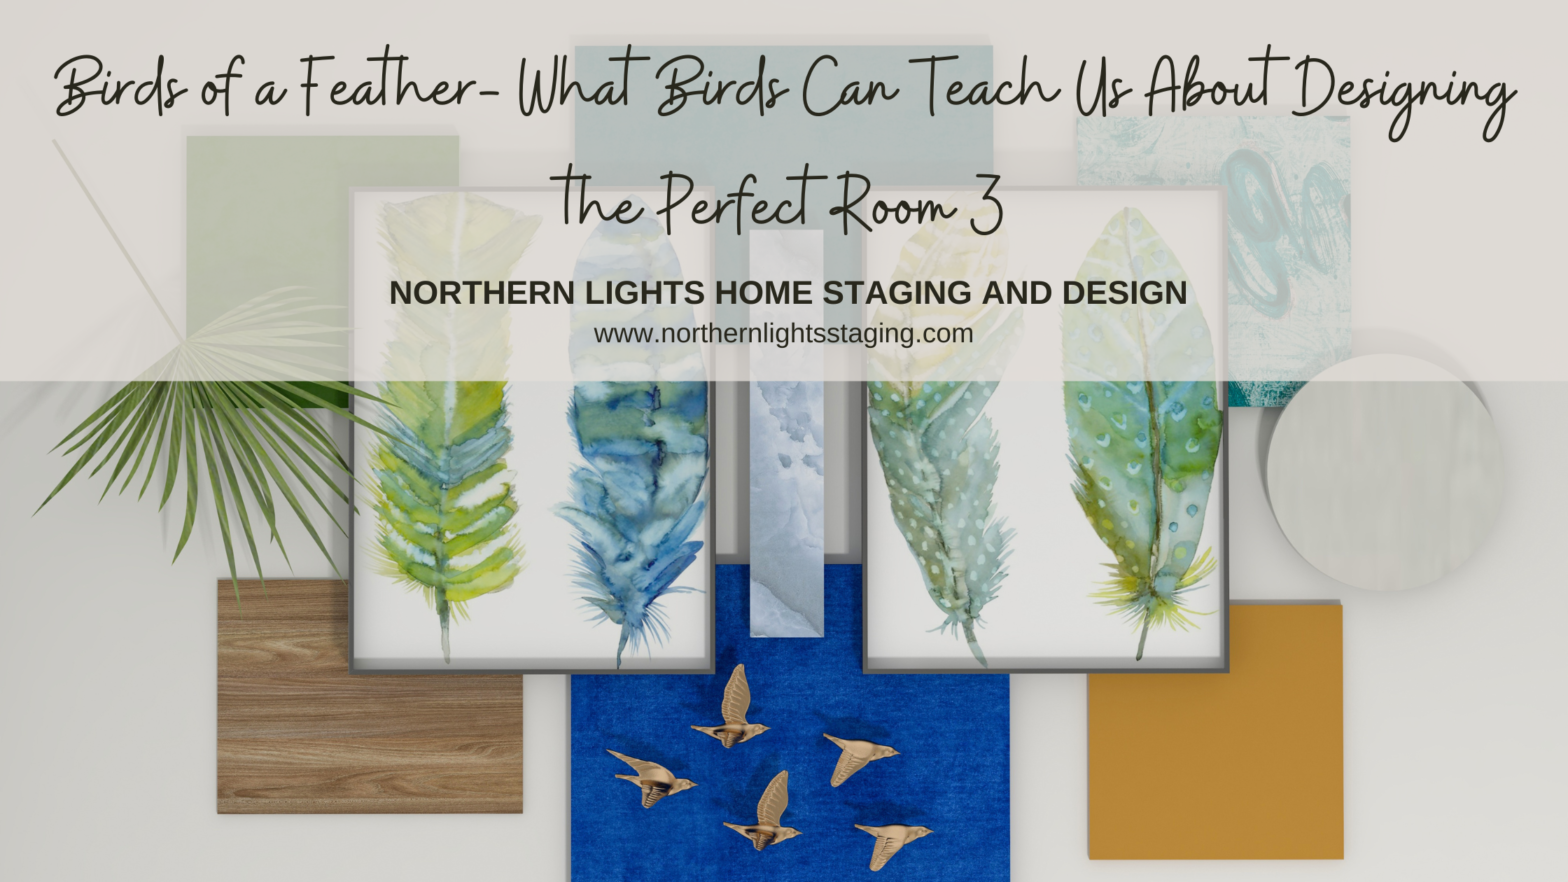 Birds of a Feather- What Birds Can Teach Us About Designing the Perfect Room 3